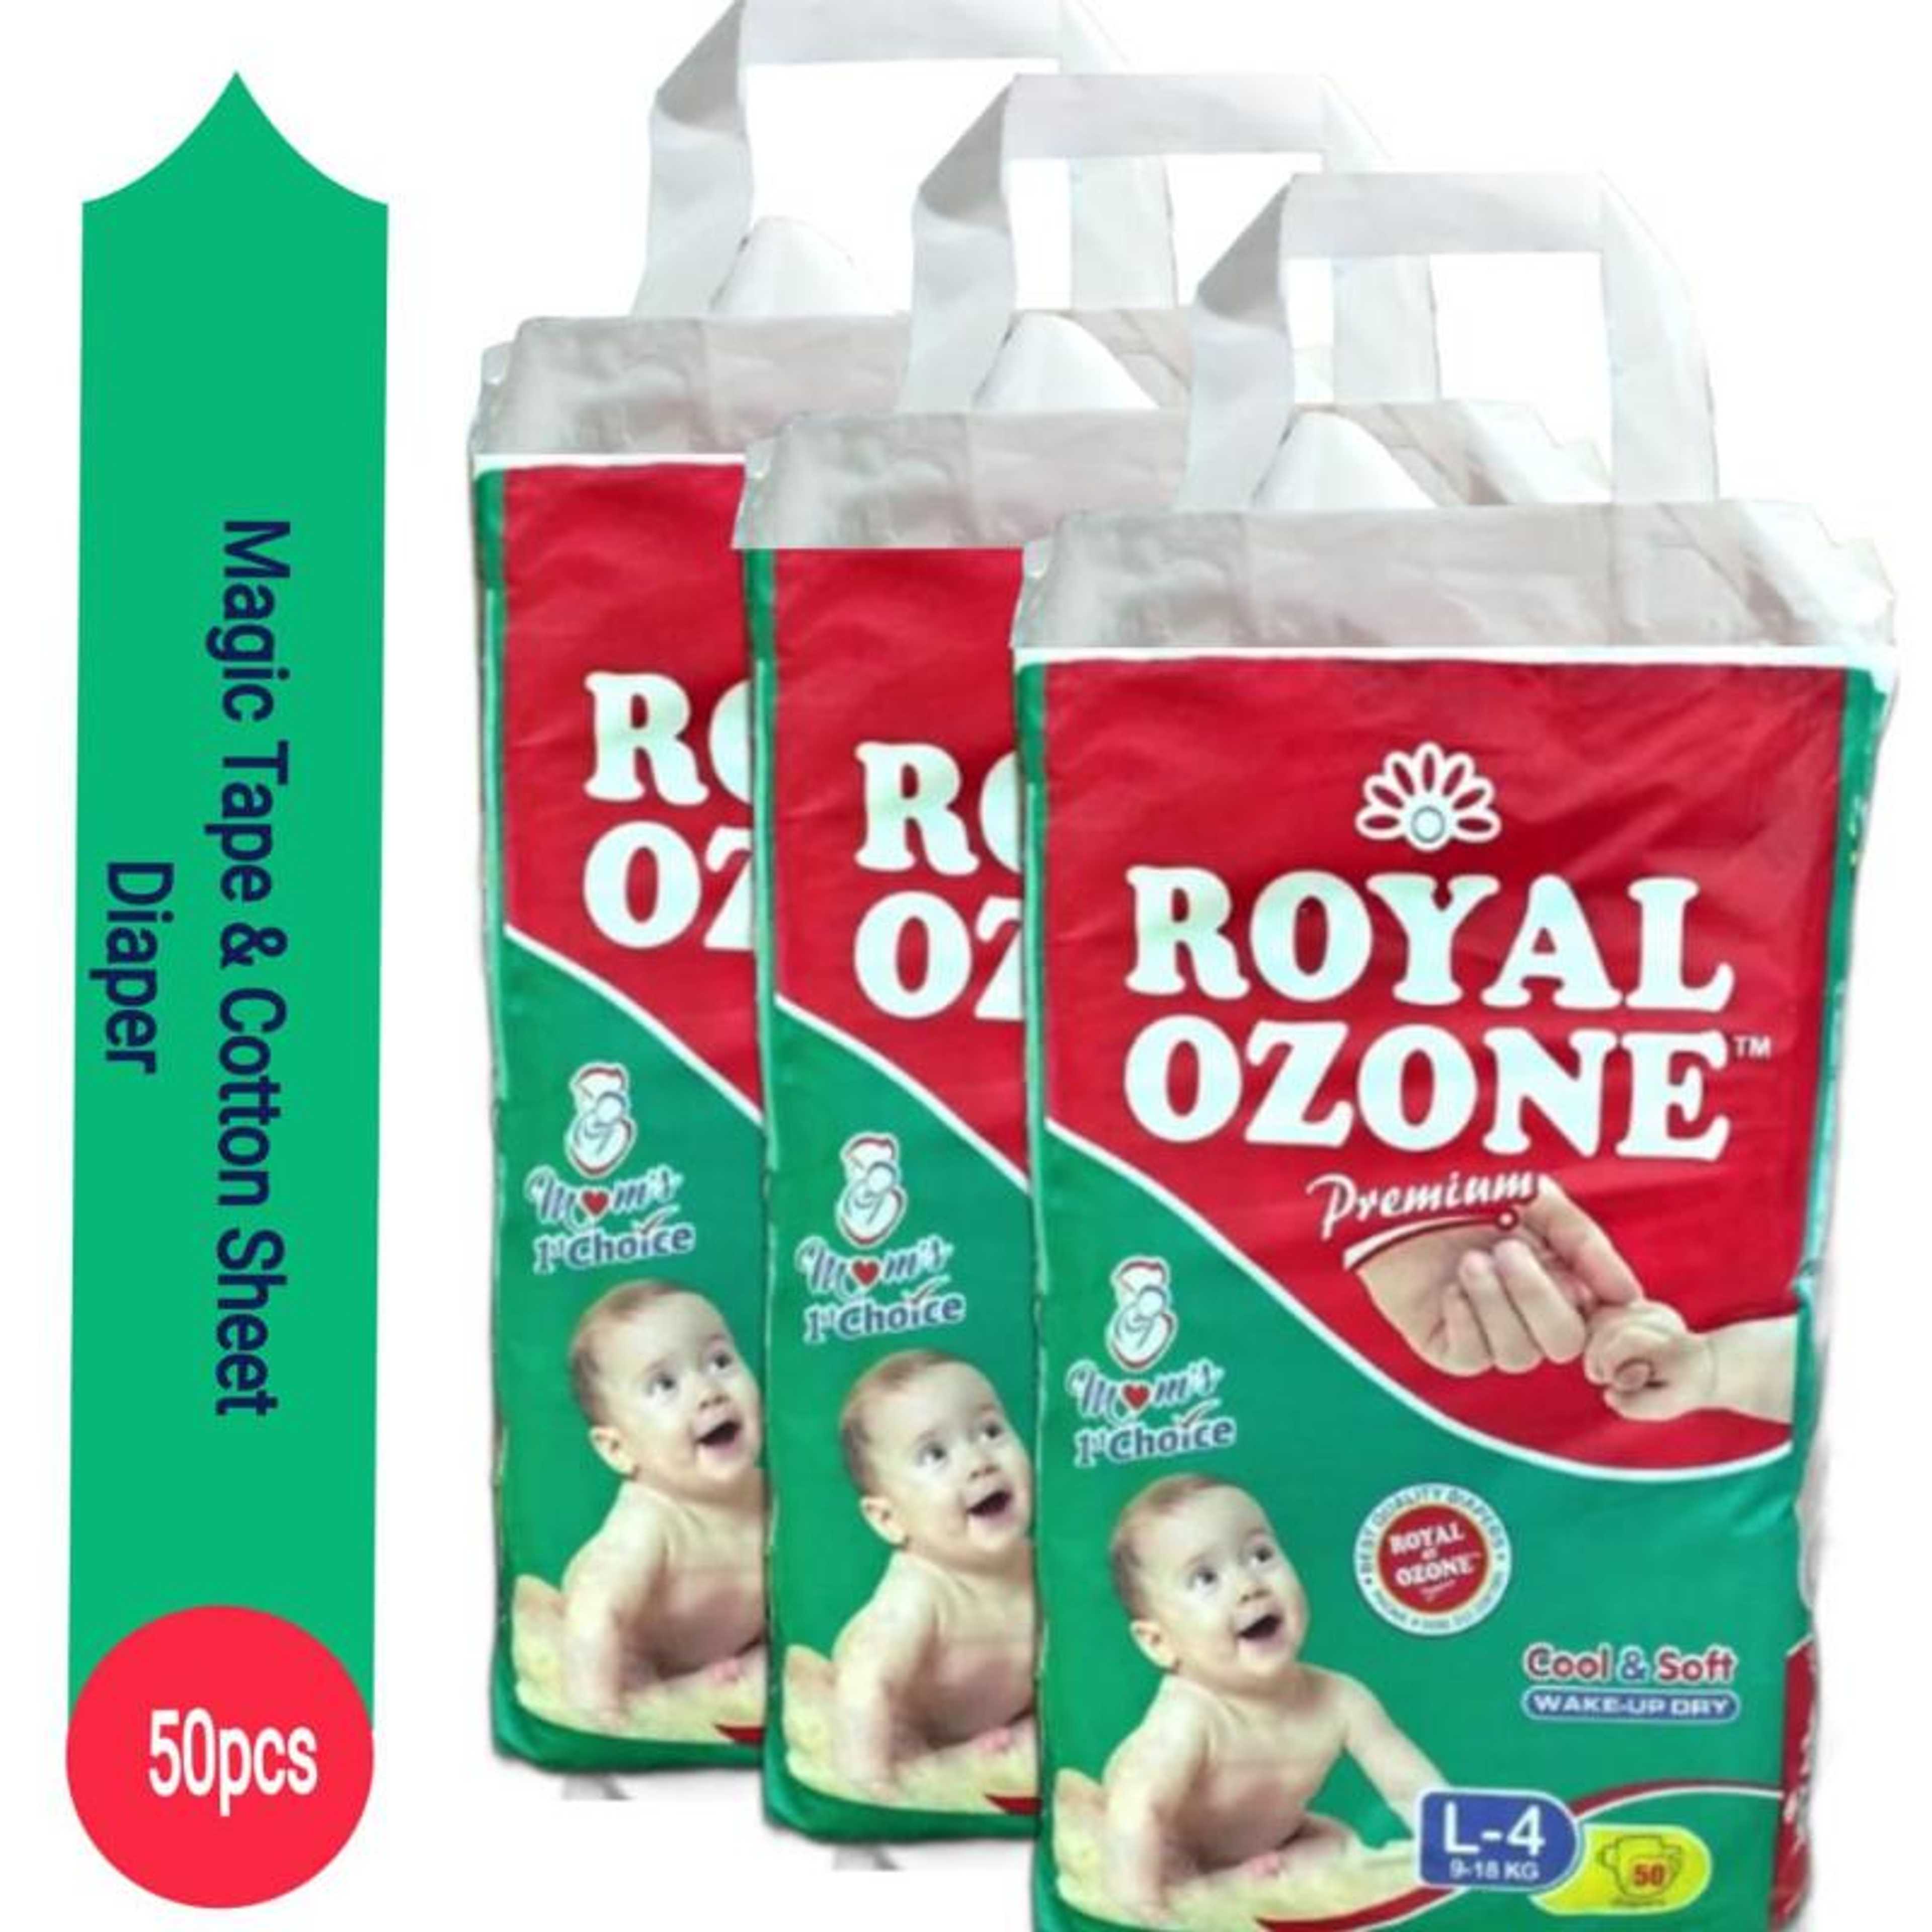 ROYAL Ozone Baby Diaper - Large Size 4 - Pack of 3 - 9-18kg - 50pcs Each Pack